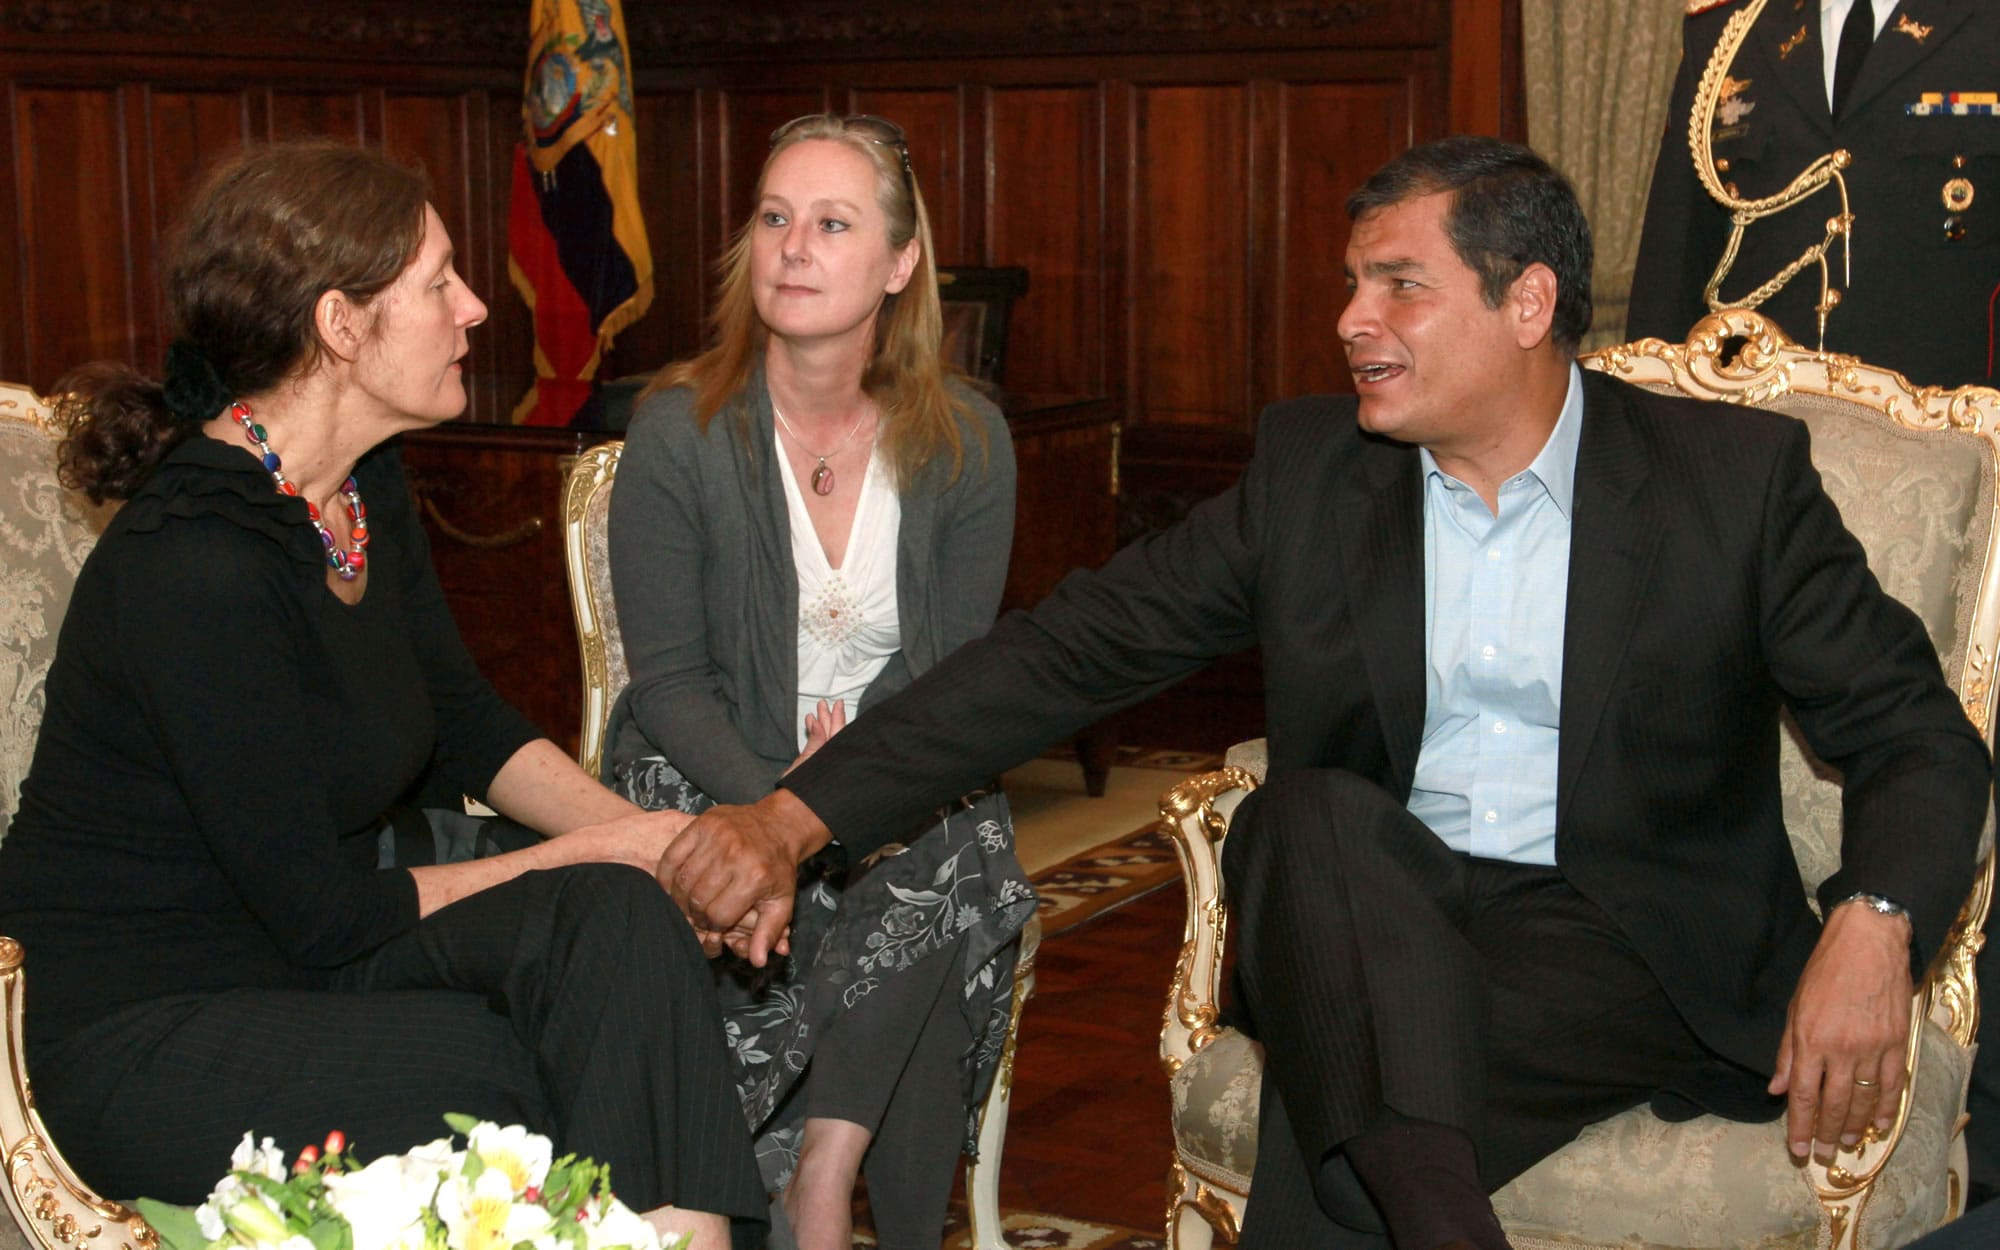 Ecuador's President Rafael Correa, right, holds the hands of Christine Assange, the mother of WikiLeaks founder Julian Assange, during their meeting in Quito, Ecuador.